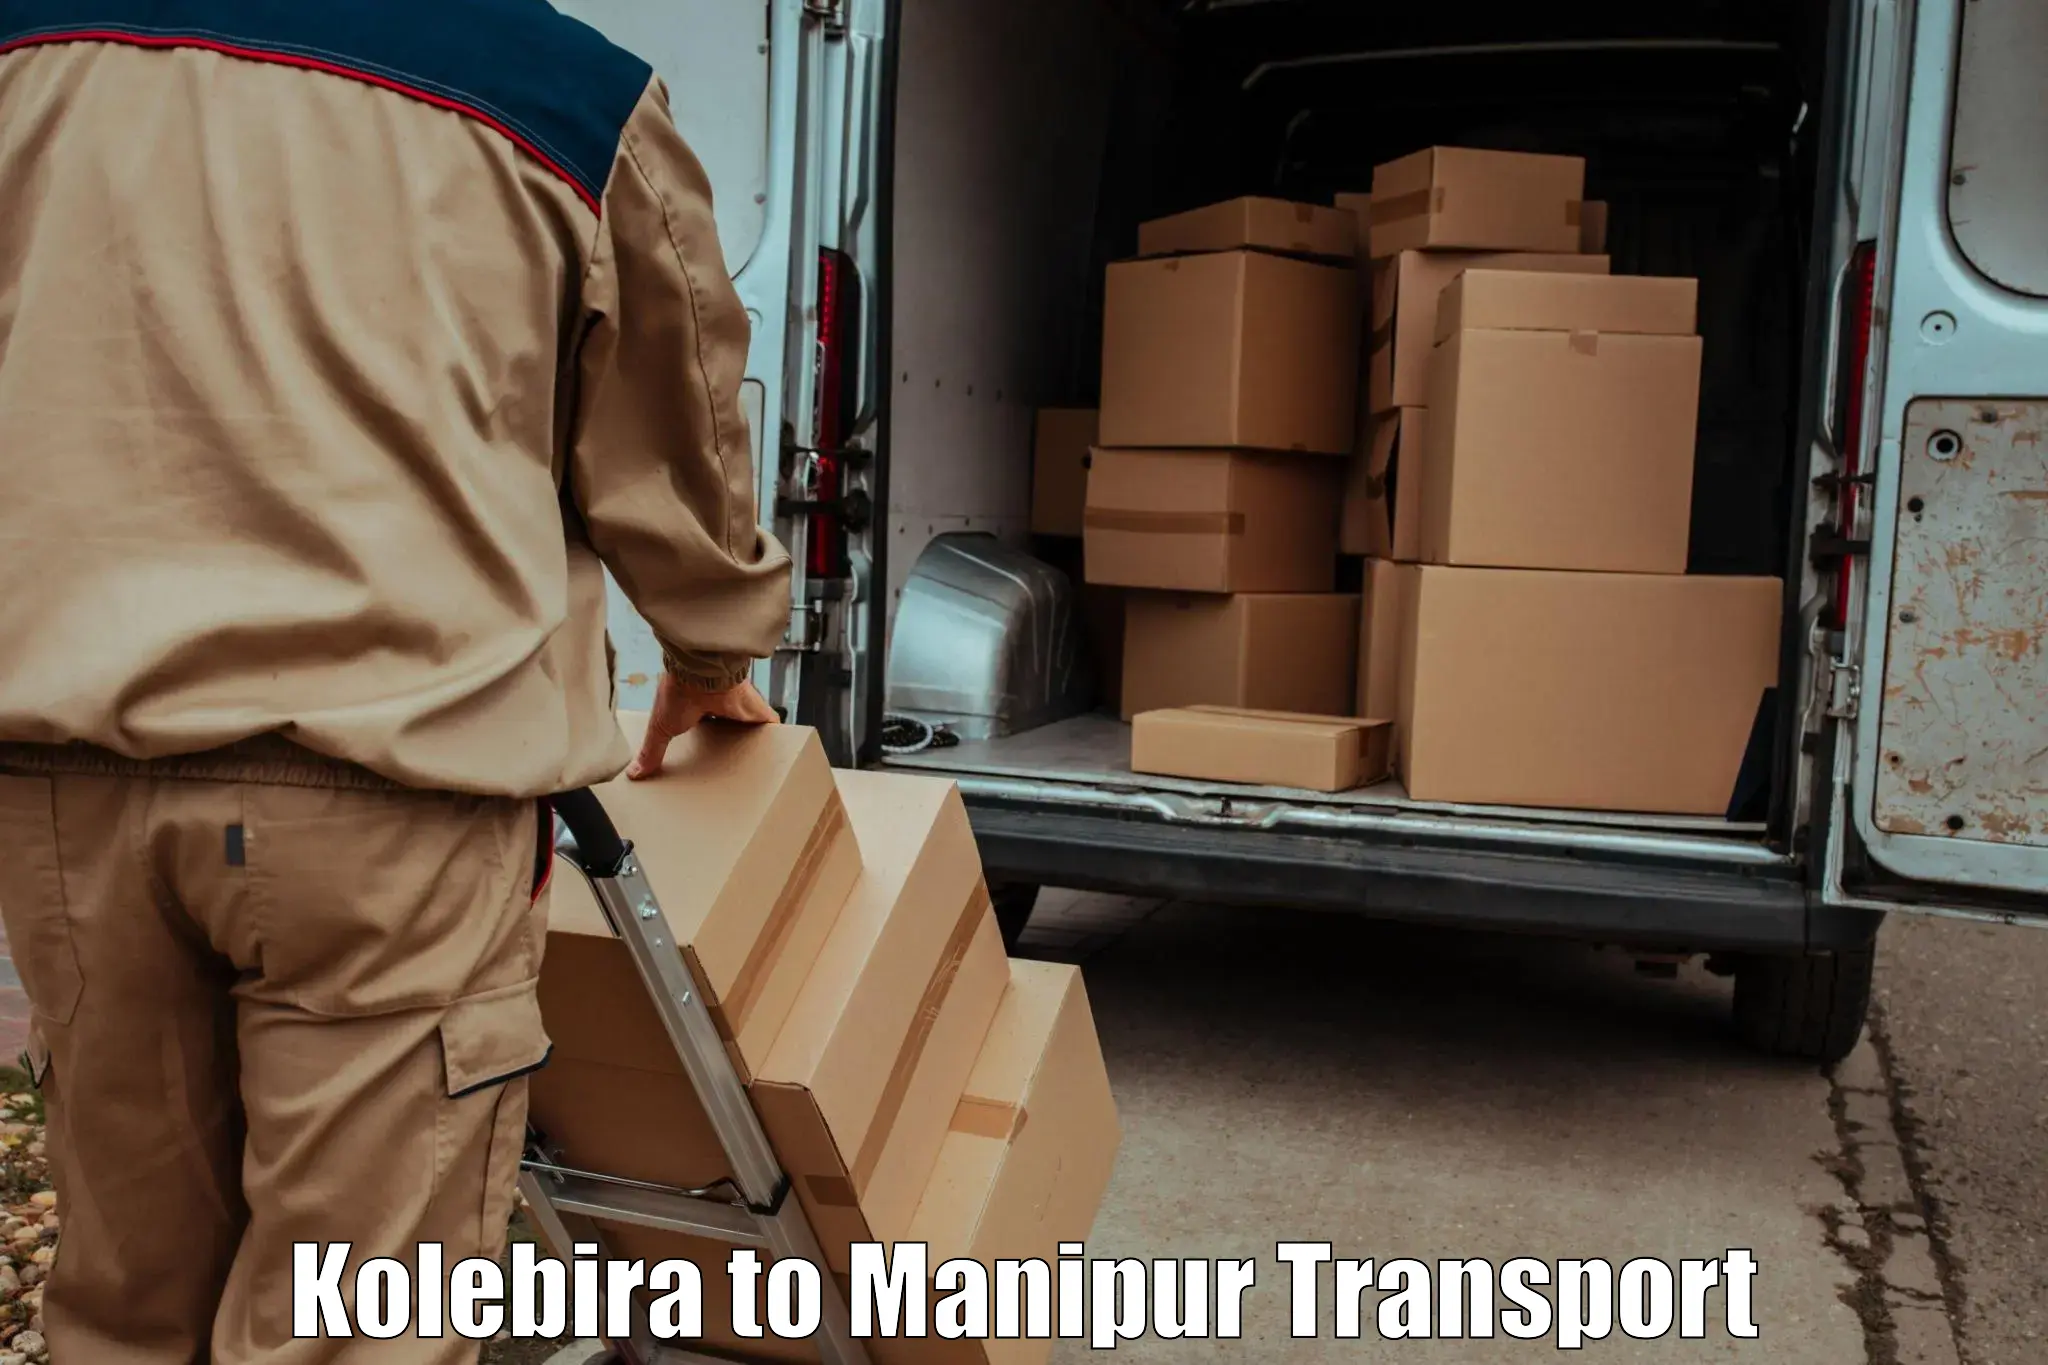 Express transport services in Kolebira to Manipur